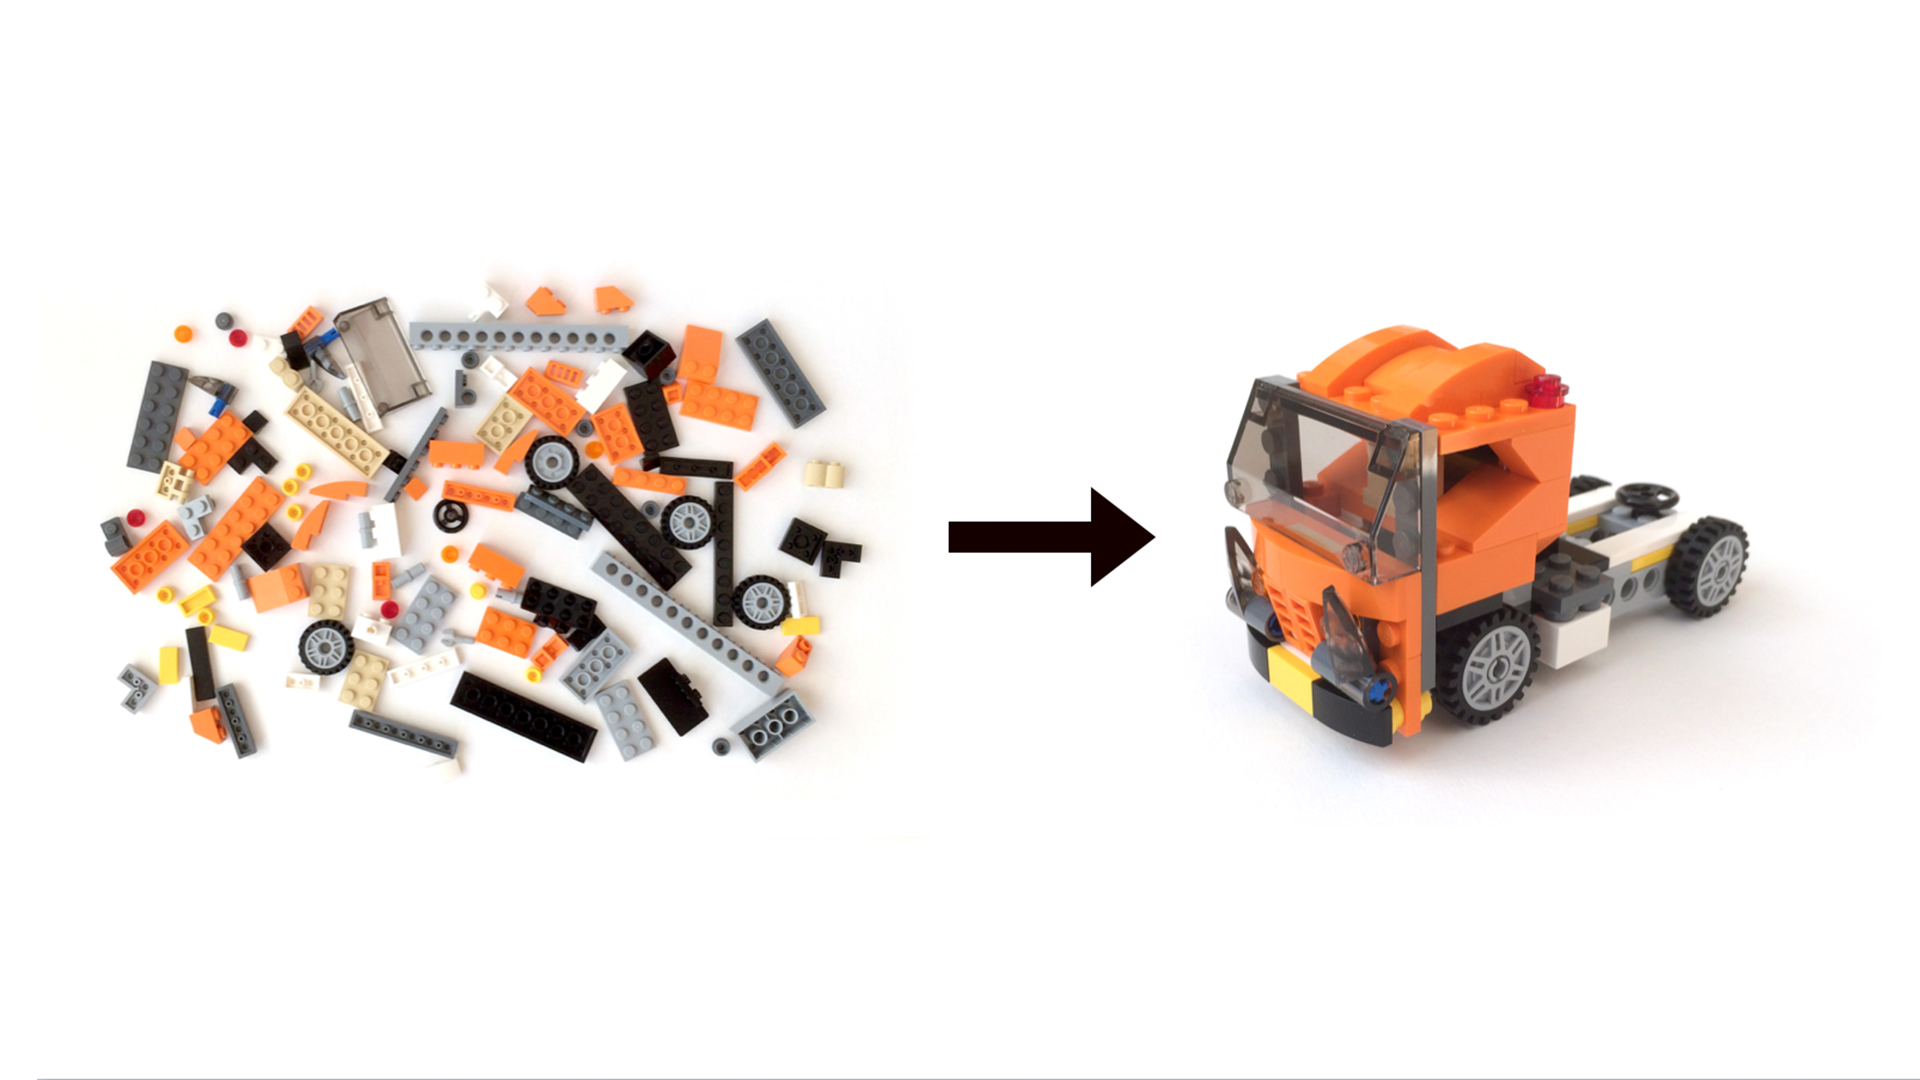 One way to approach a Lego project is to simply dump the pieces out onto a table, and rummage through the pile to find the pieces you need. Image adapted from *Multiscreen UX Design* by Wolfram Nagel.